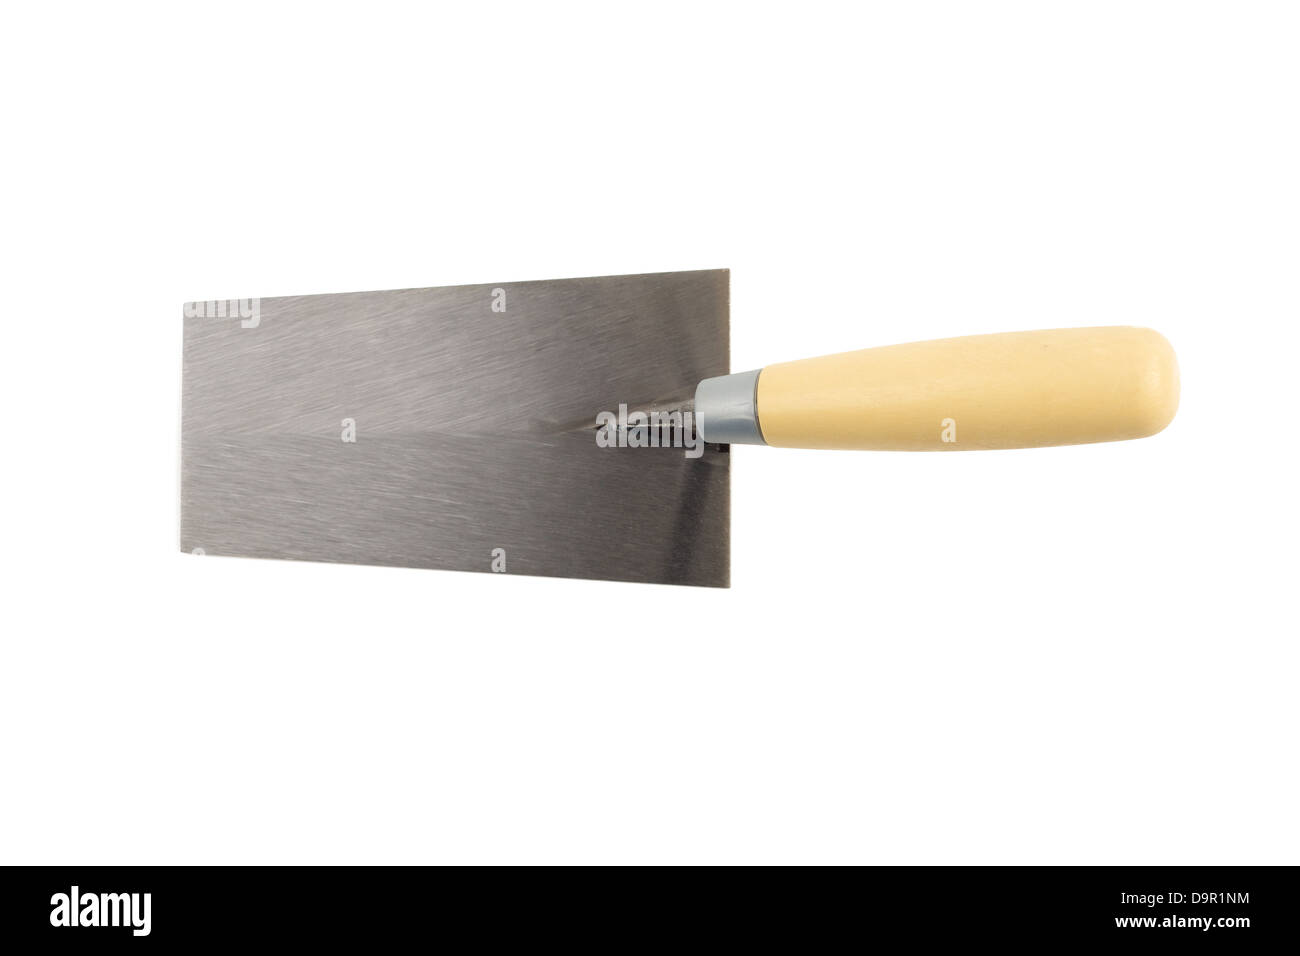 Trowel work tool isolated on white background Stock Photo